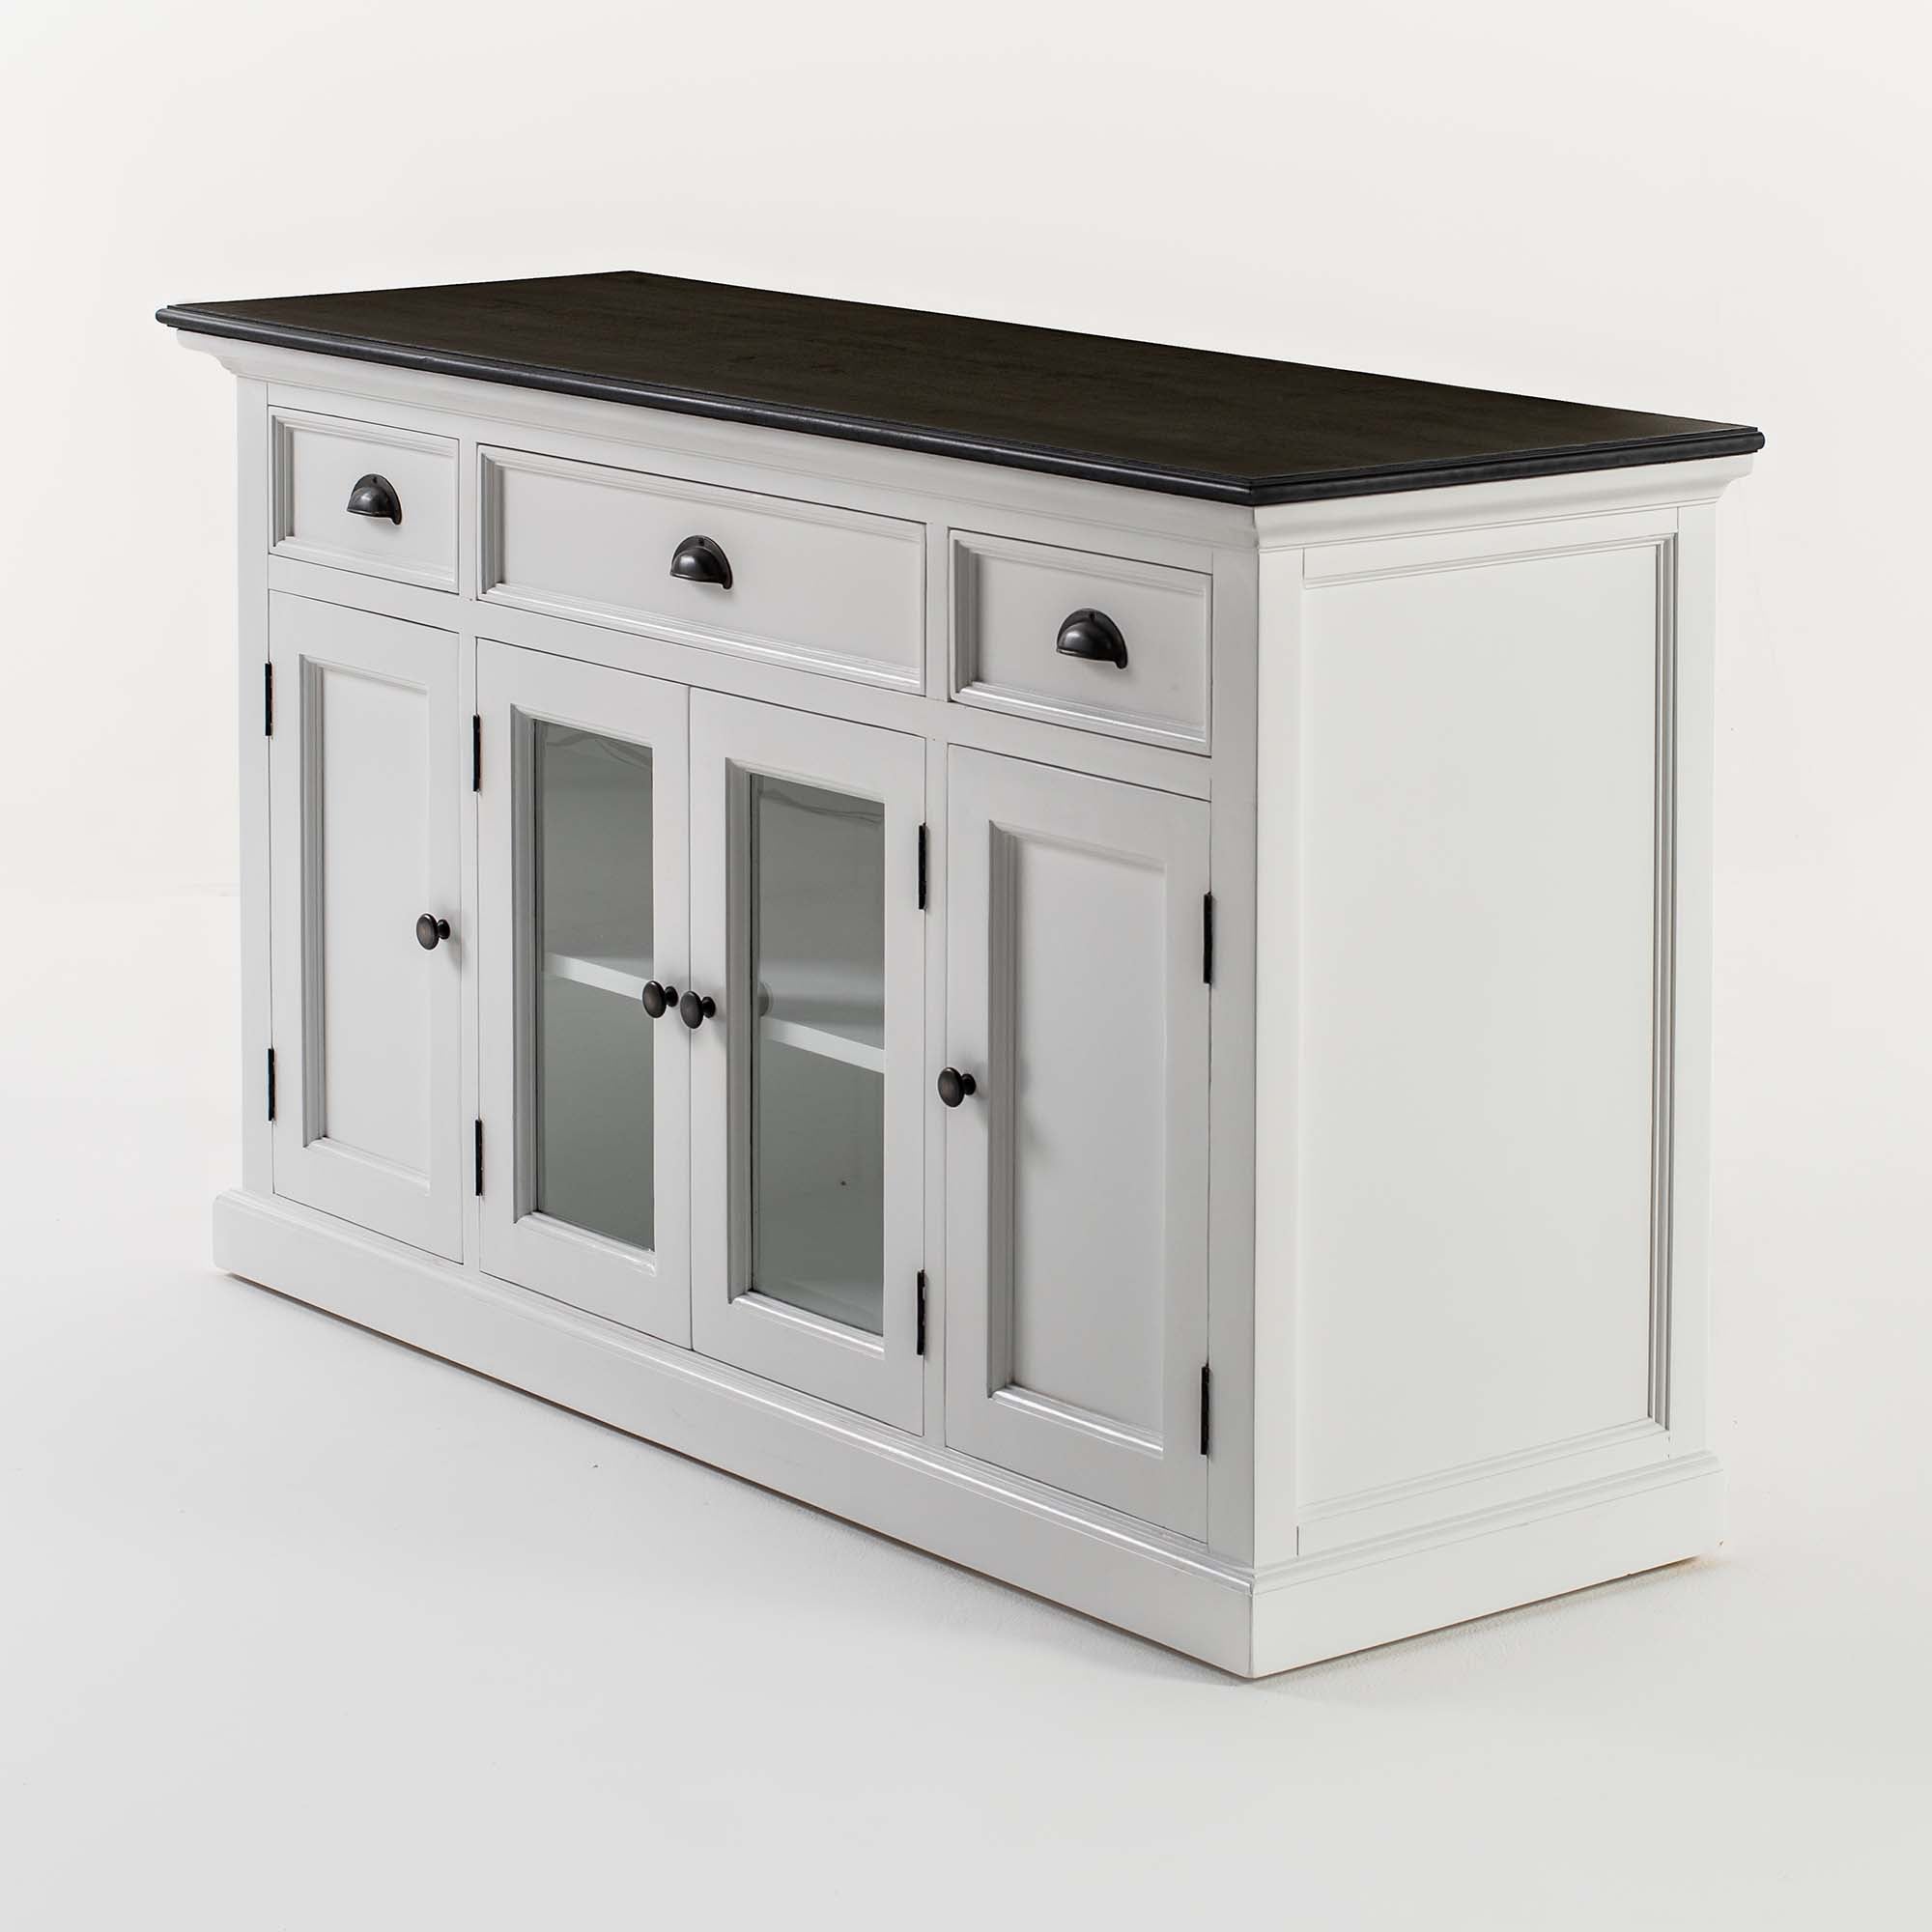 Halifax Contrast Farmhouse White & Black Buffet with 4 Doors 3 Drawers